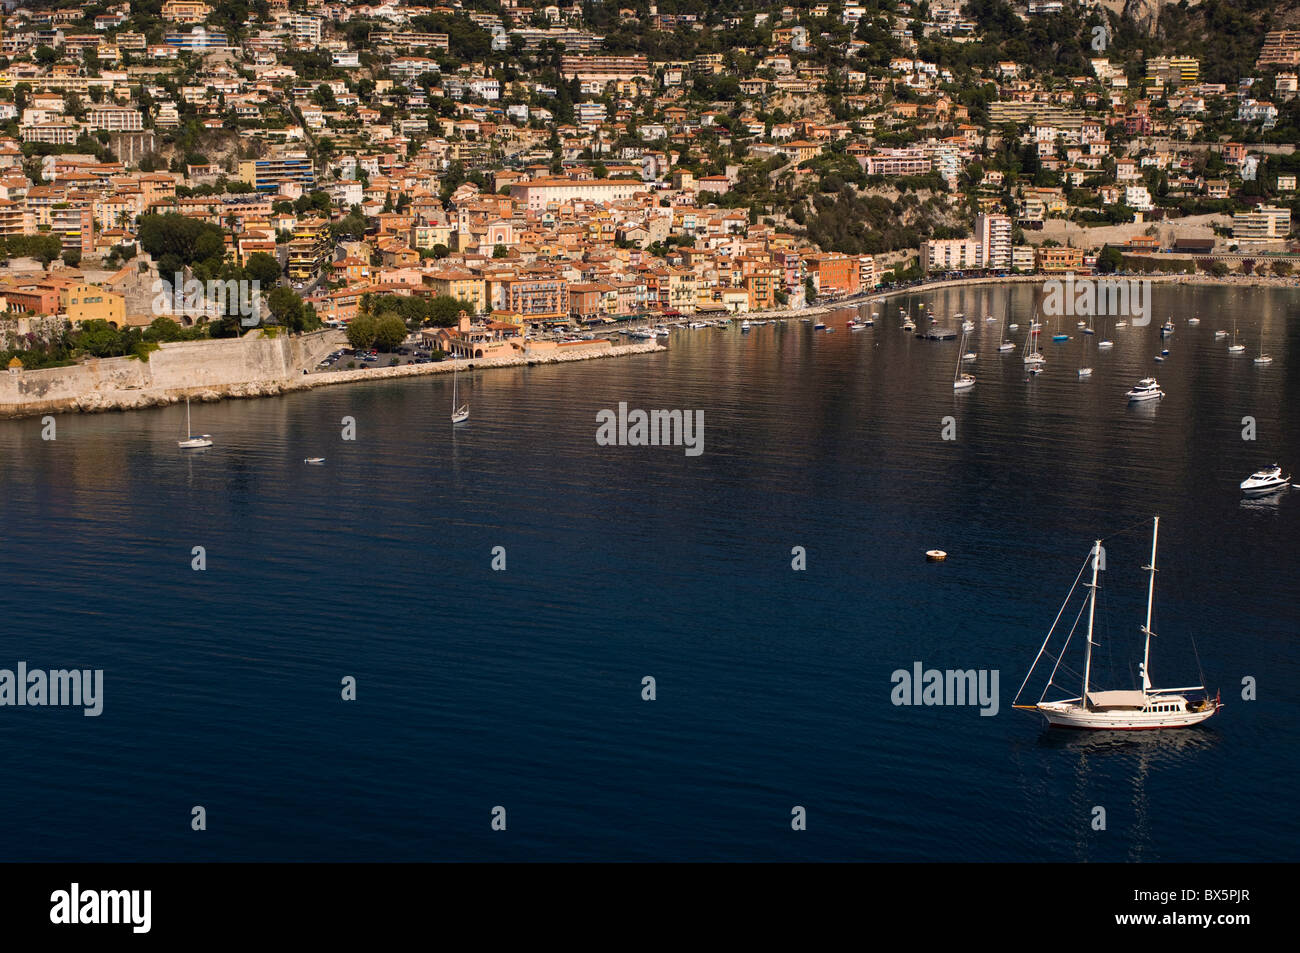 View from helicopter of Villefranche, Alpes-Maritimes, Provence, Cote d'Azur, French Riviera, France, Mediterranean, Europe Stock Photo